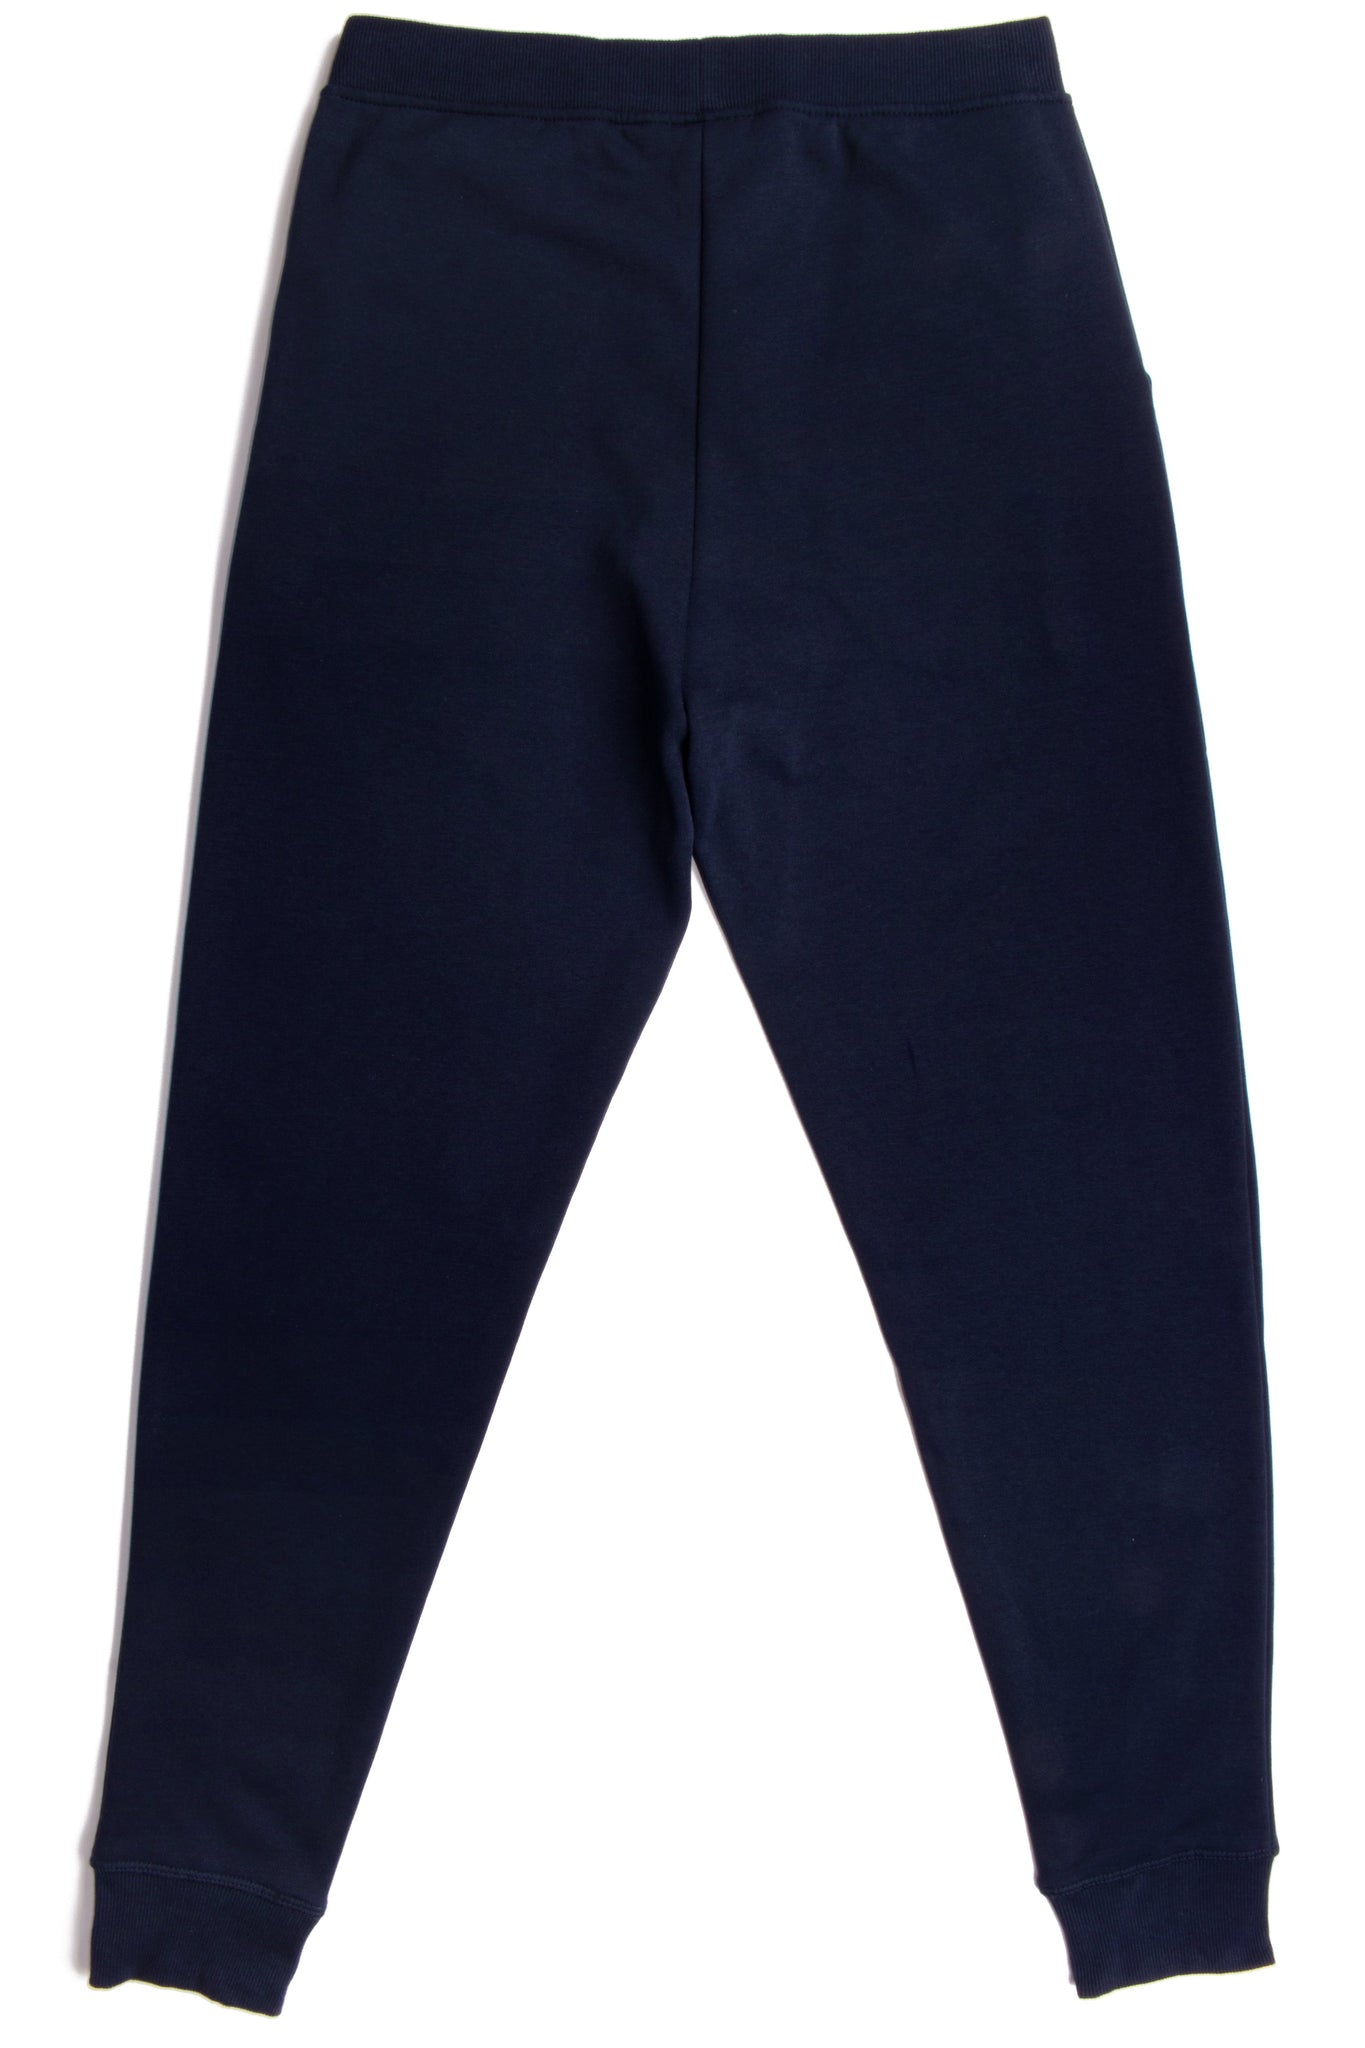 HERO - 5020R Youth Joggers - Navy Blue (Relaxed Fit)